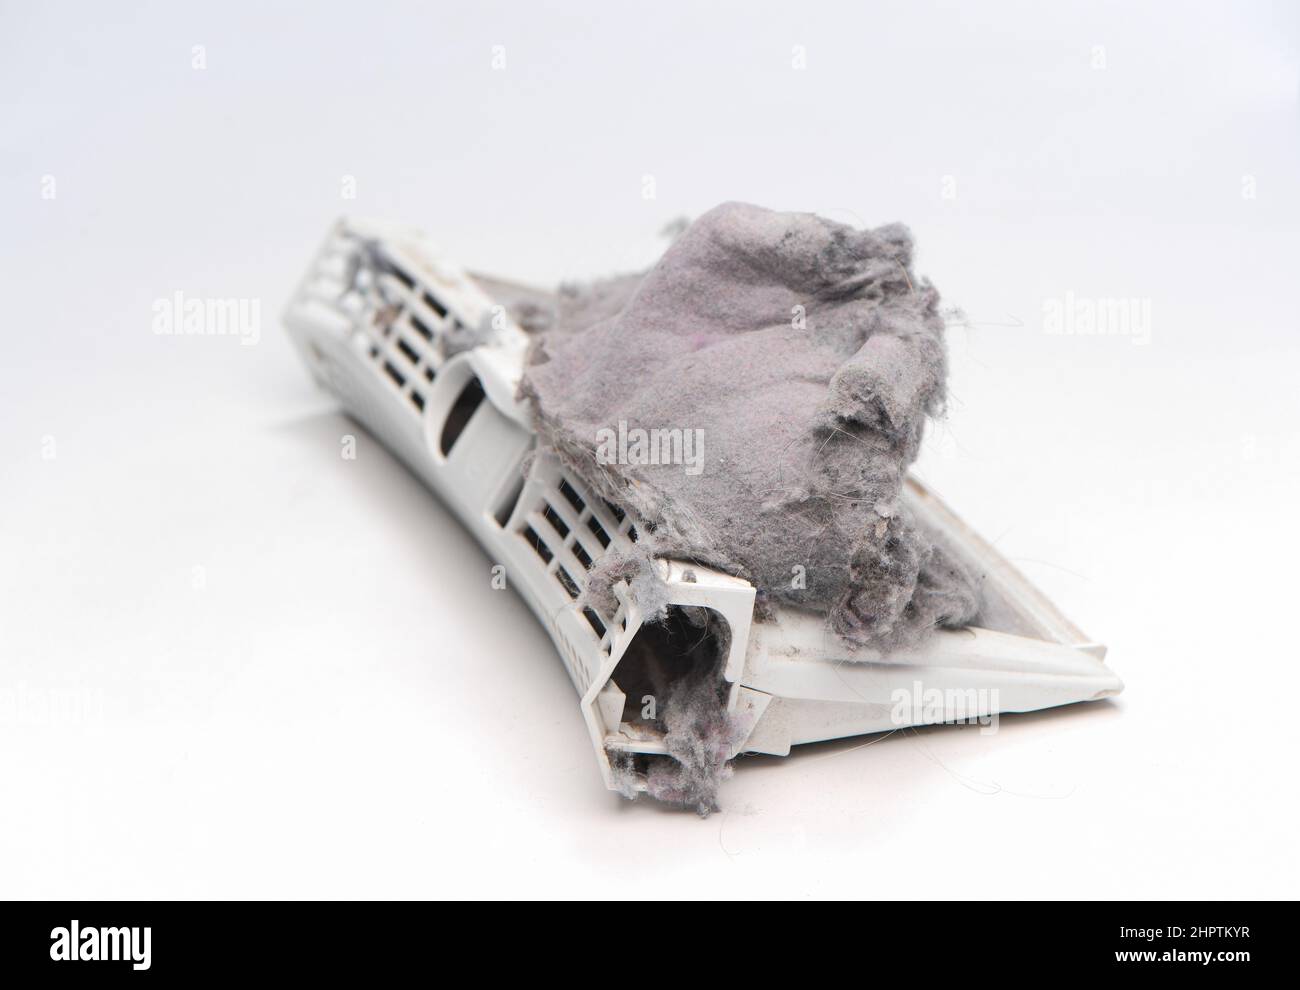 A tumble drier fluff filter catcher full of clothing fluff on a white background Stock Photo